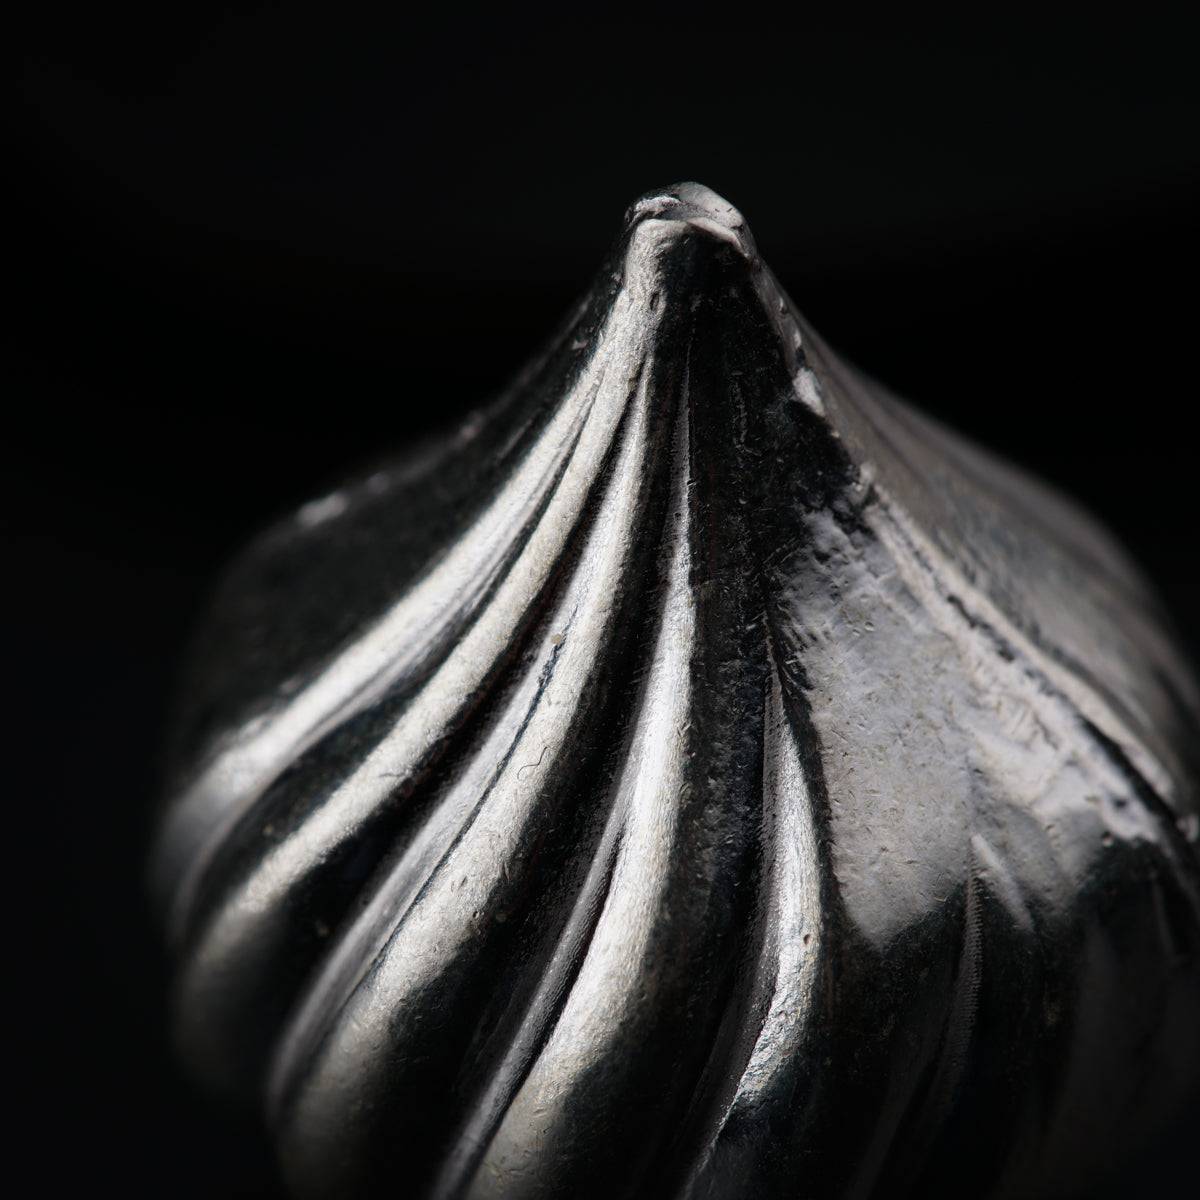 a close up of a metal object on a black background